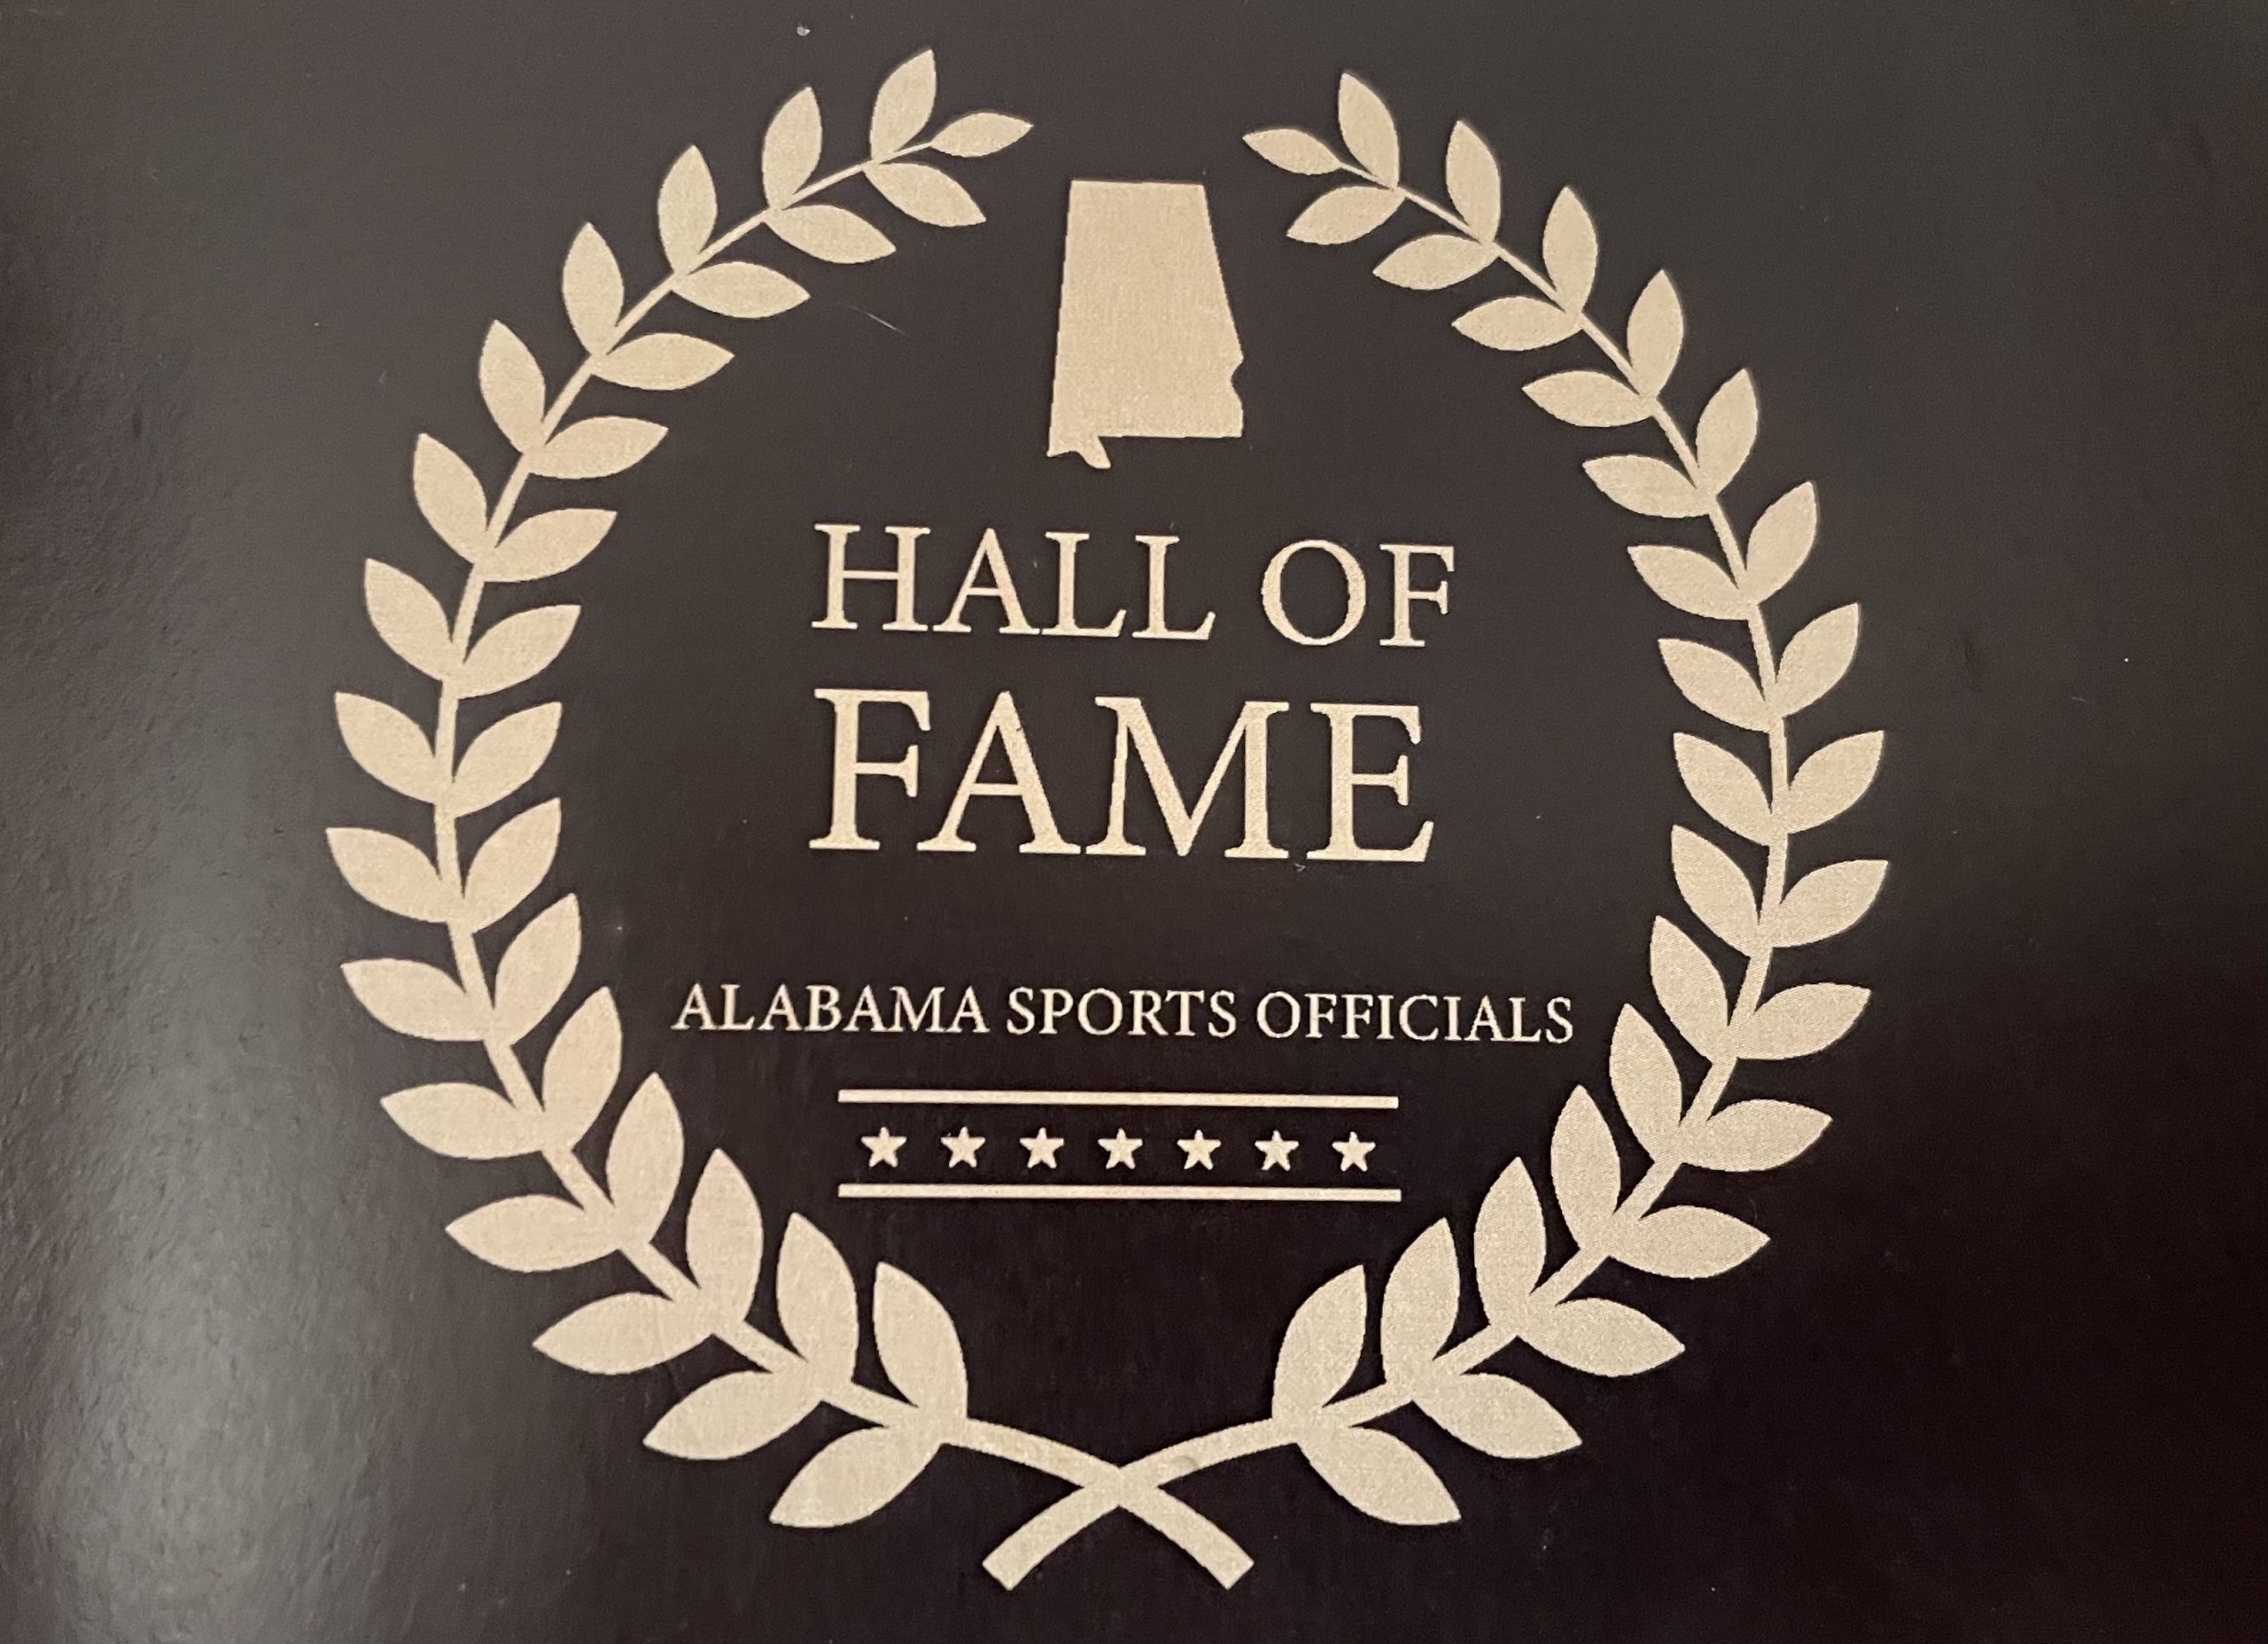 Trussville's Greg England inducted into Alabama Sports Officials Hall of Fame